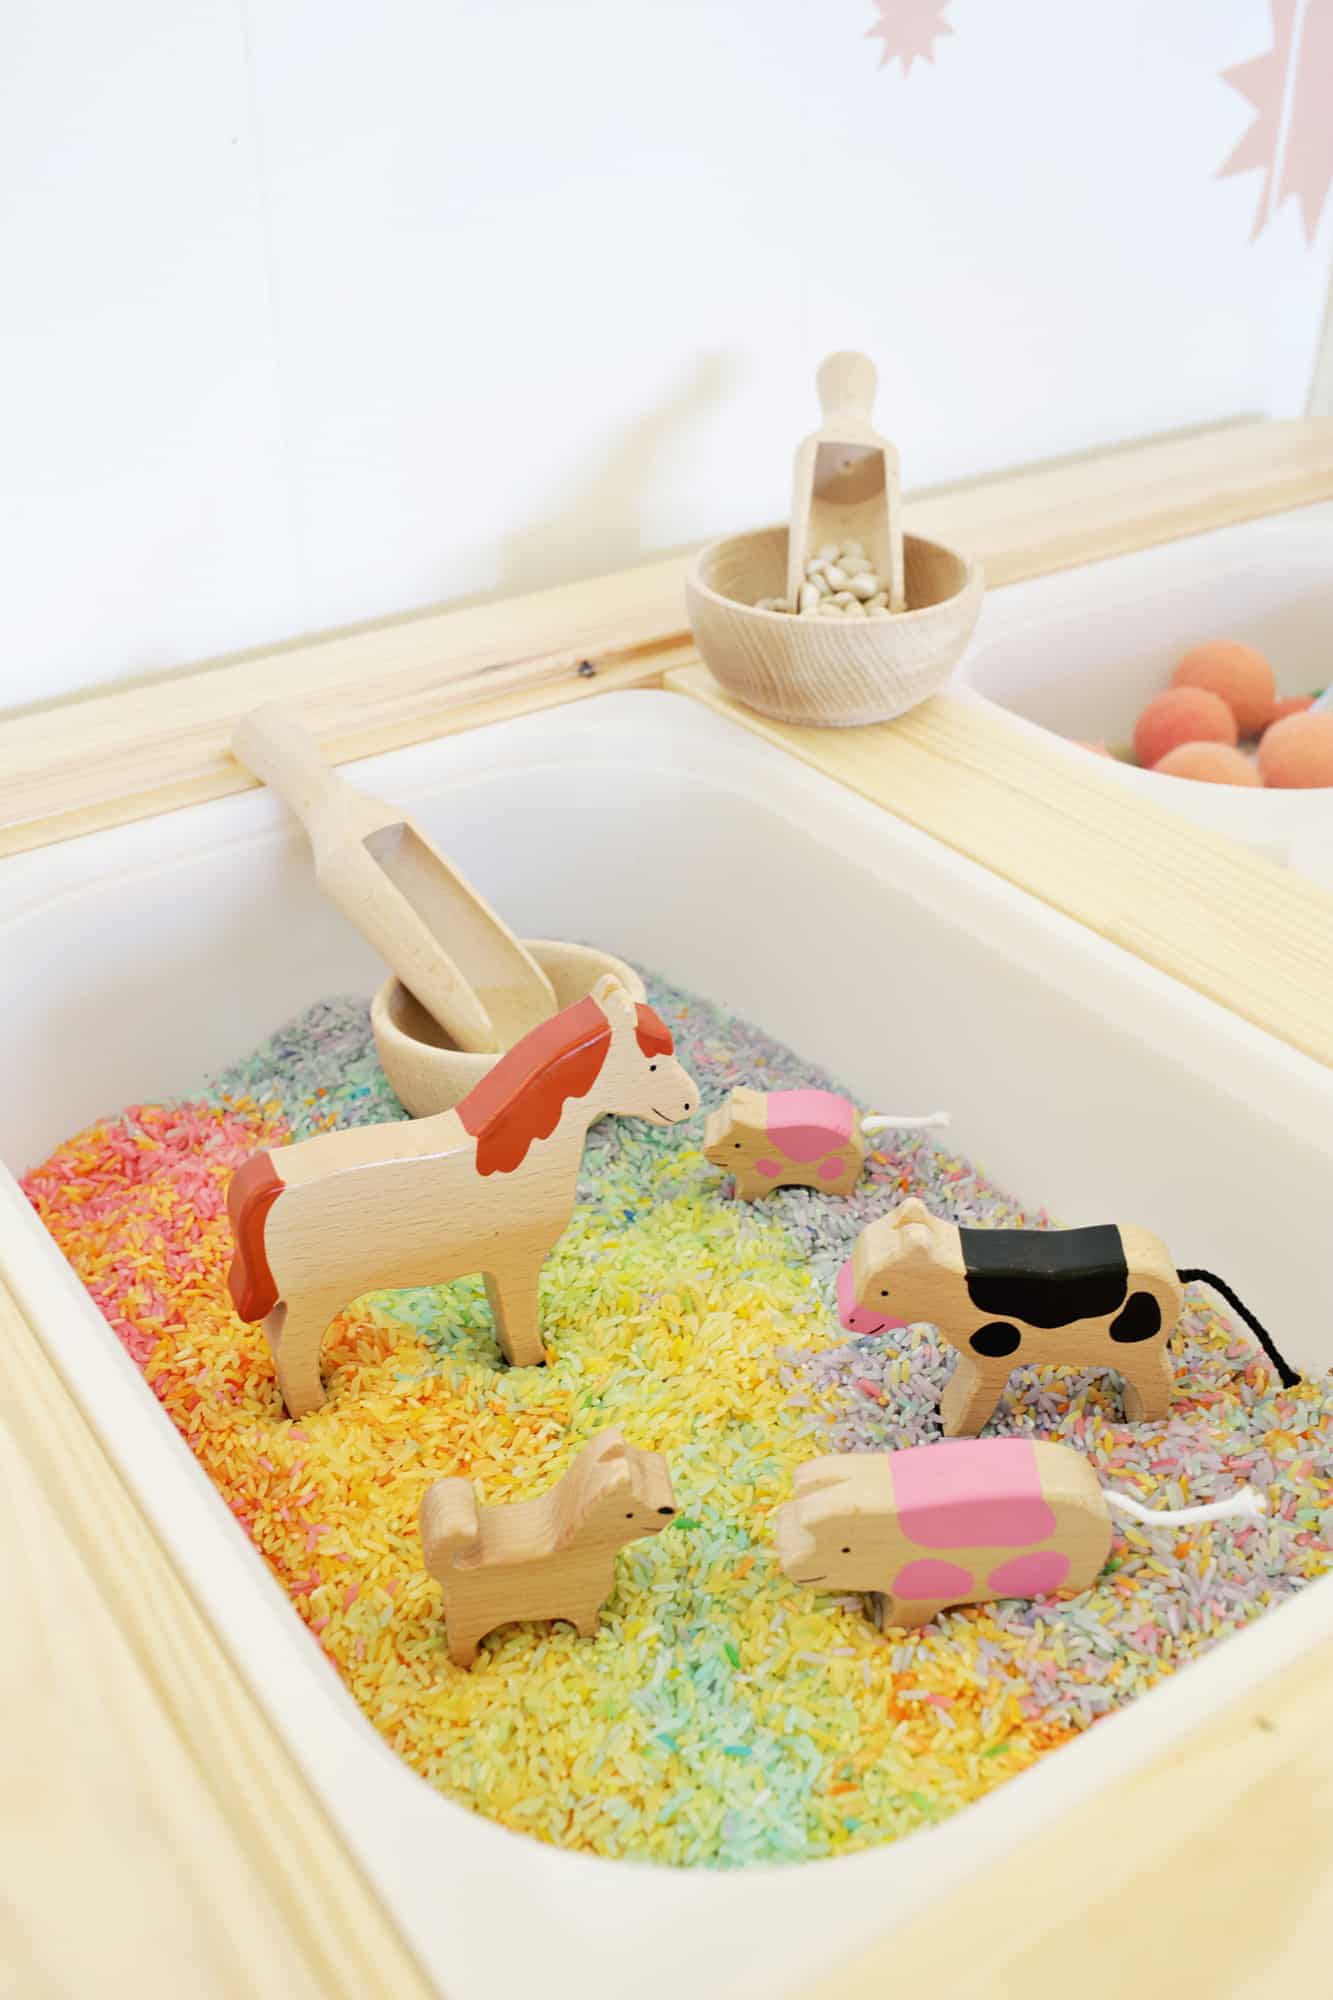 wooden animals in the bin of colorful rice with a wooden scoop and a wooden bowl